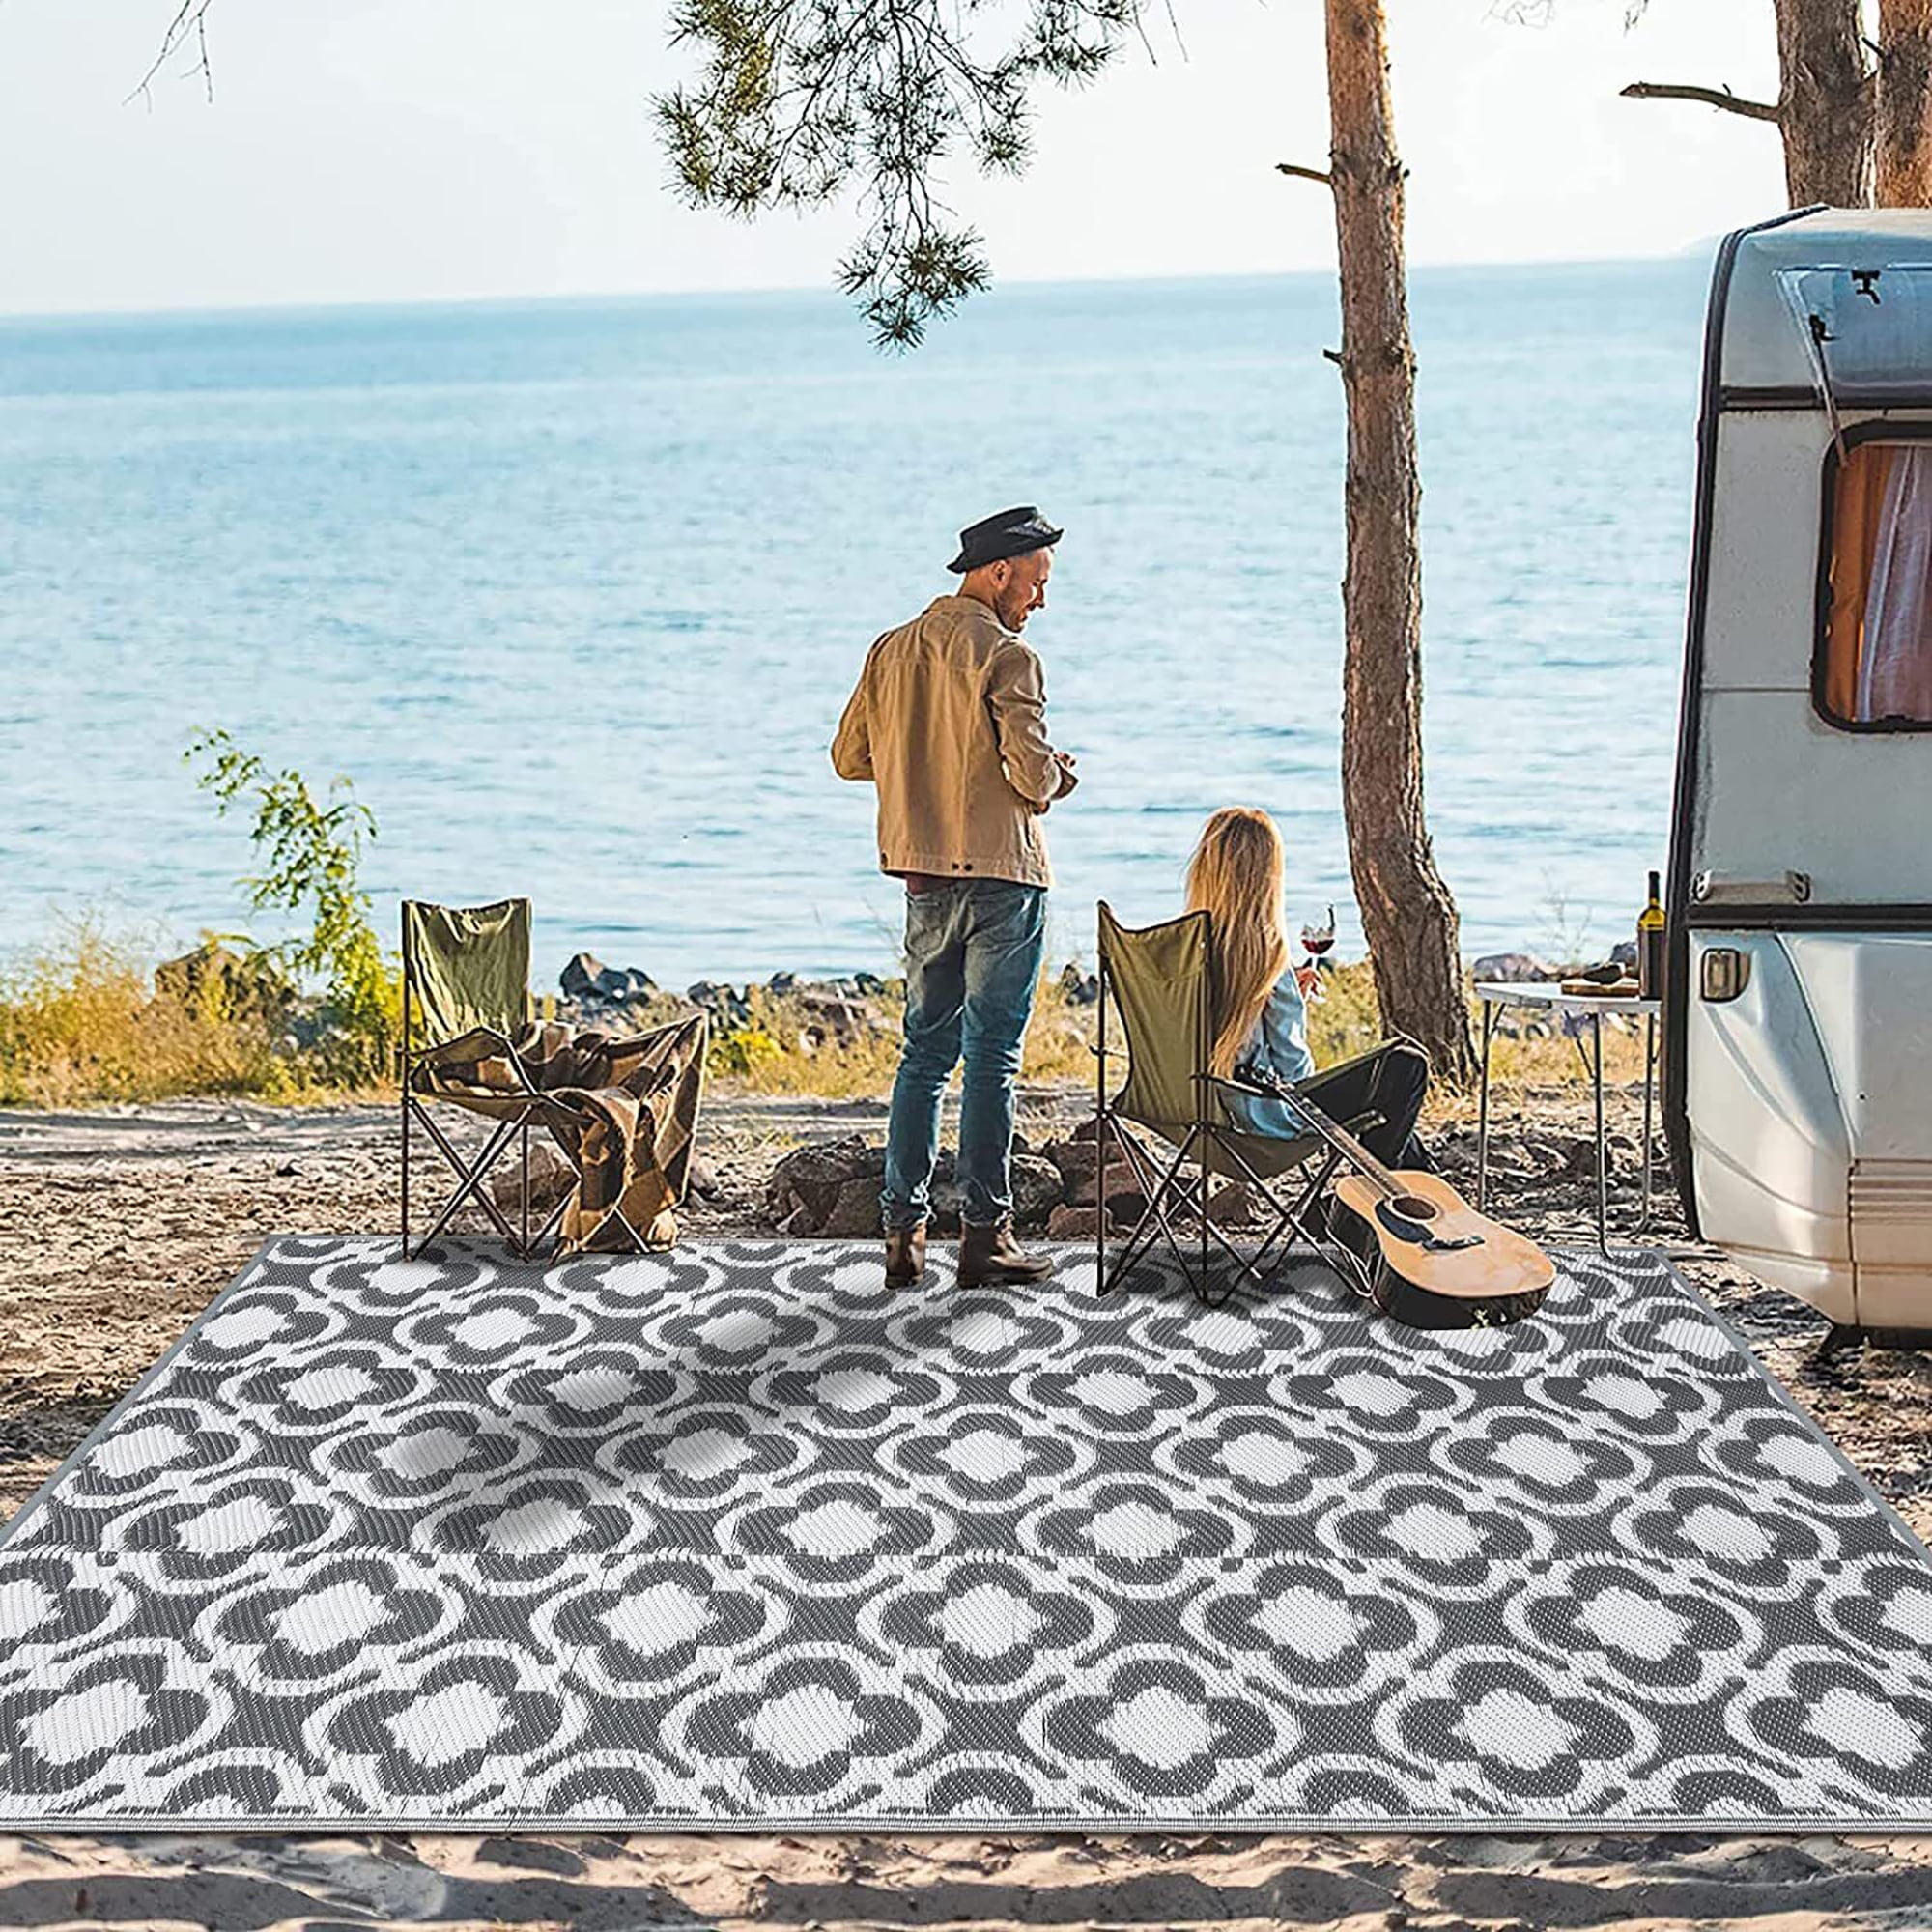 DODOING Outdoor Rug 4'x6'/6'x 9'/5'x 8' for Patios Waterproof RV Camping Mat  Reversible Plastic Straw Carpet Clearance Doormats Indoor Outside Area Rug  for RV Camper,Apartment Balcony,Pool,Beach 